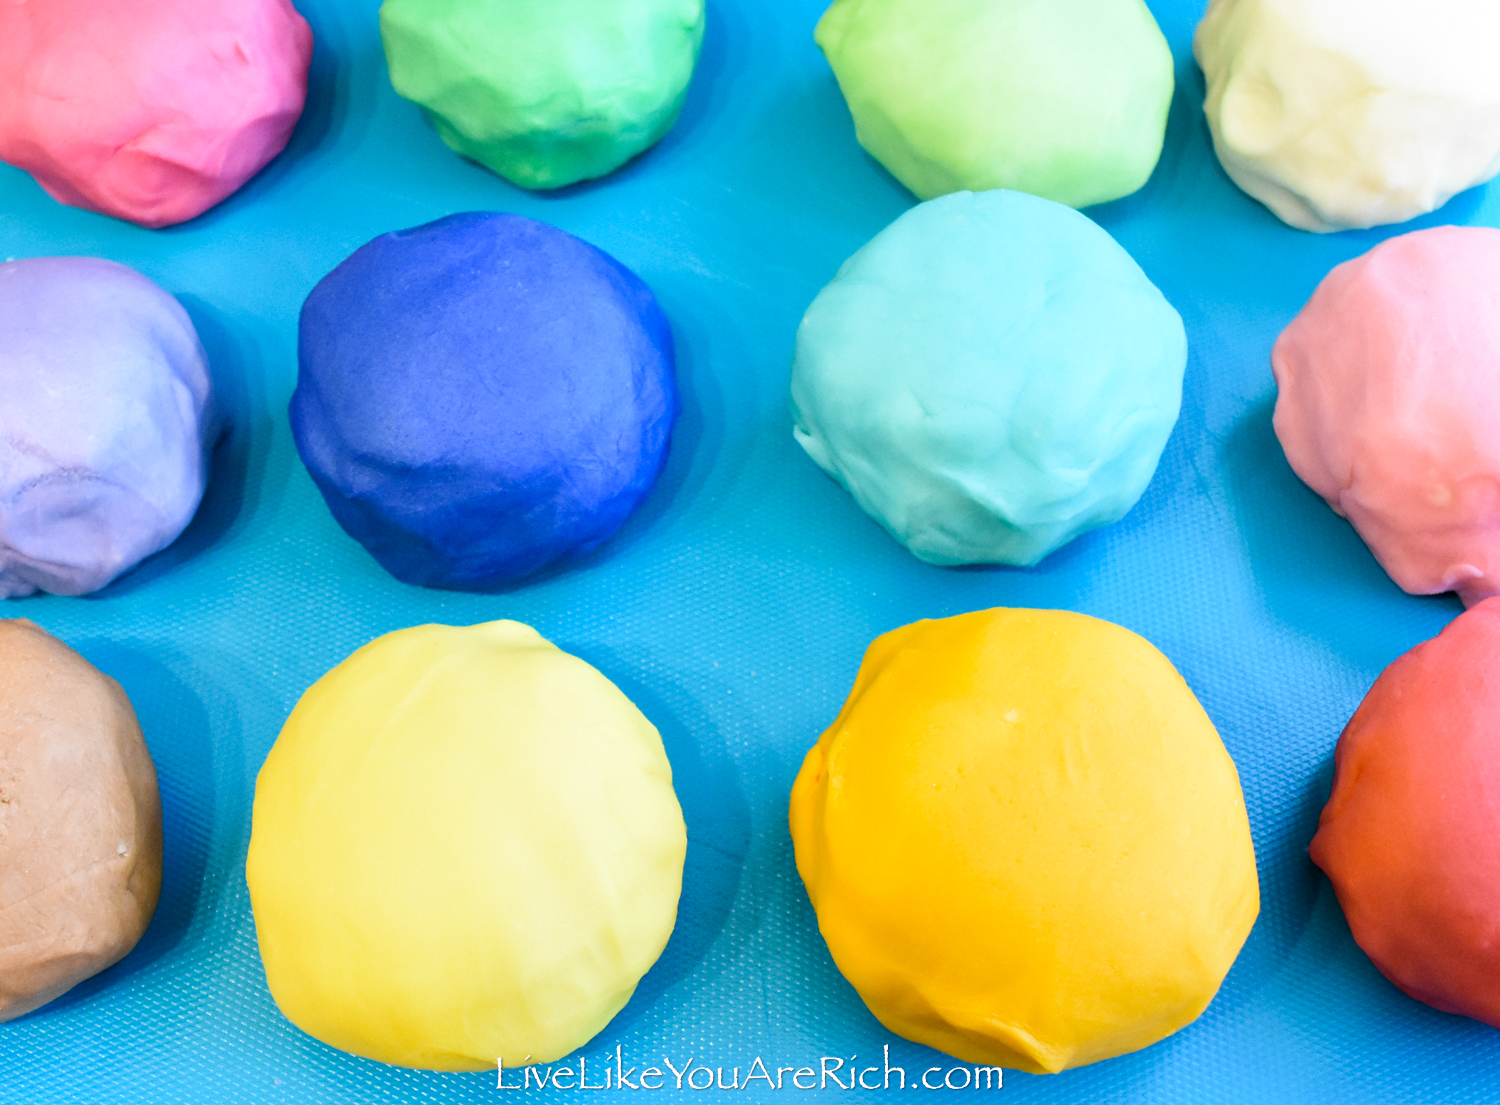 Homemade Play Dough That Stays Soft for Months